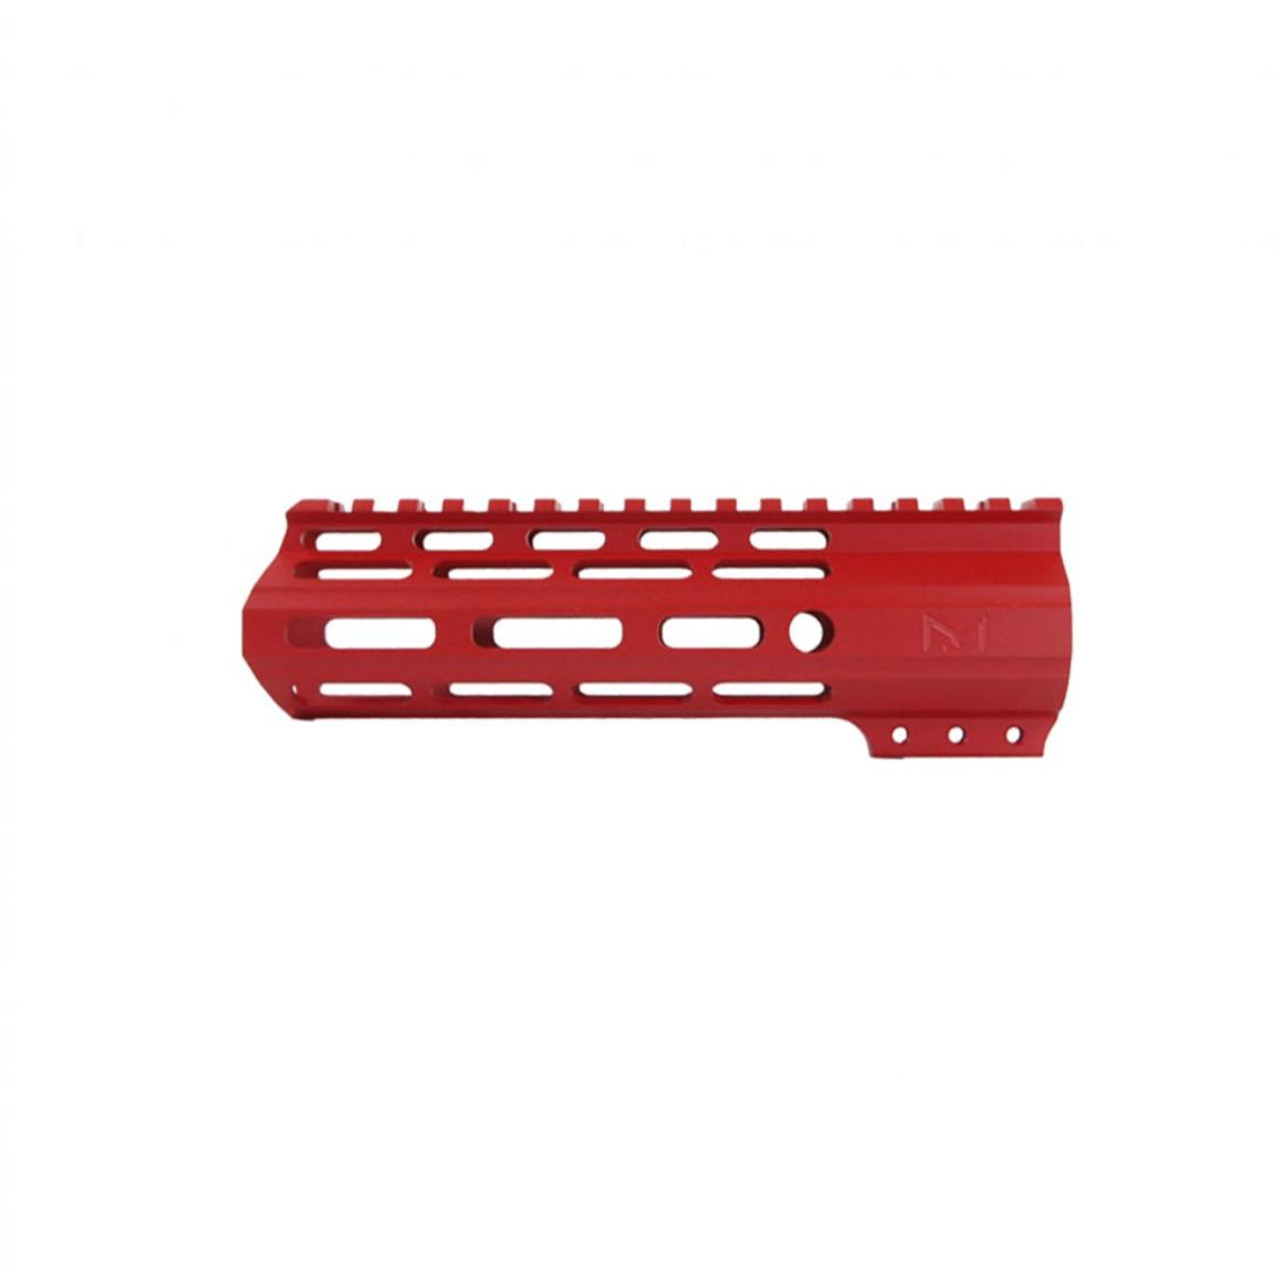 MCS AR-15 M-Lok Super Slim Light Free Float Handguard MADE IN USA Red Options Available 